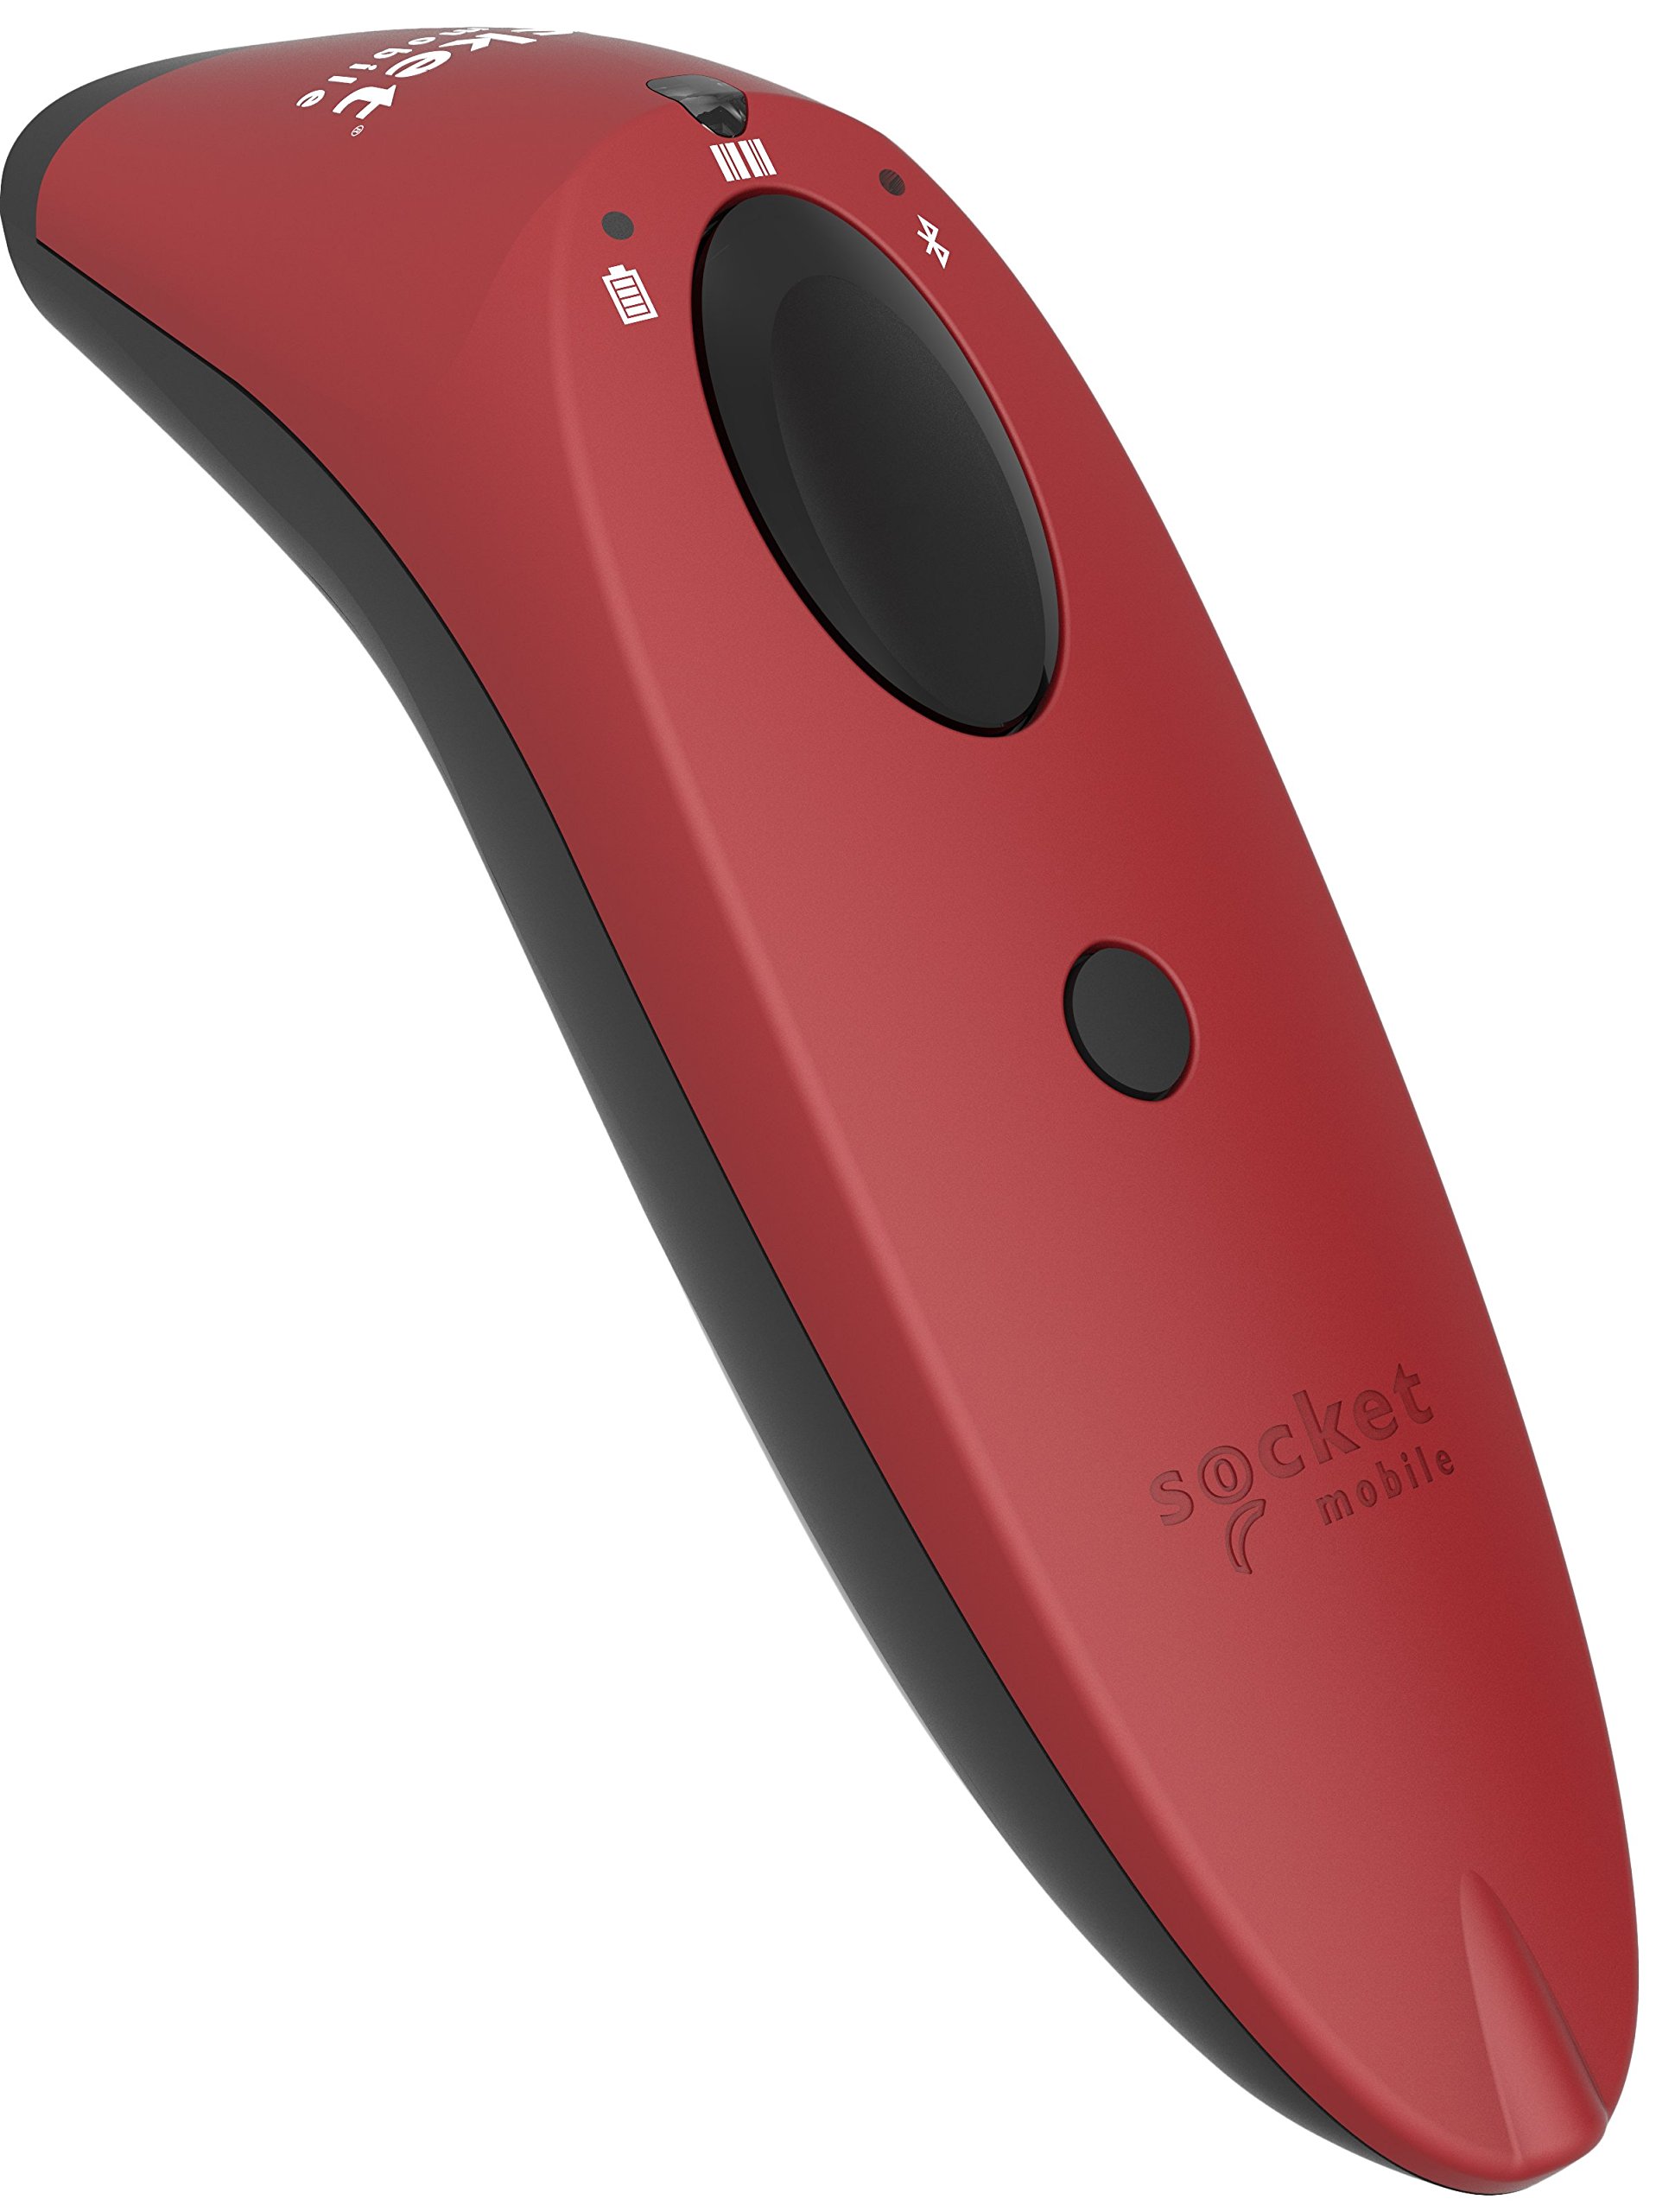 SOCKETSCAN S700 1D IMGR RED Barcode SCA